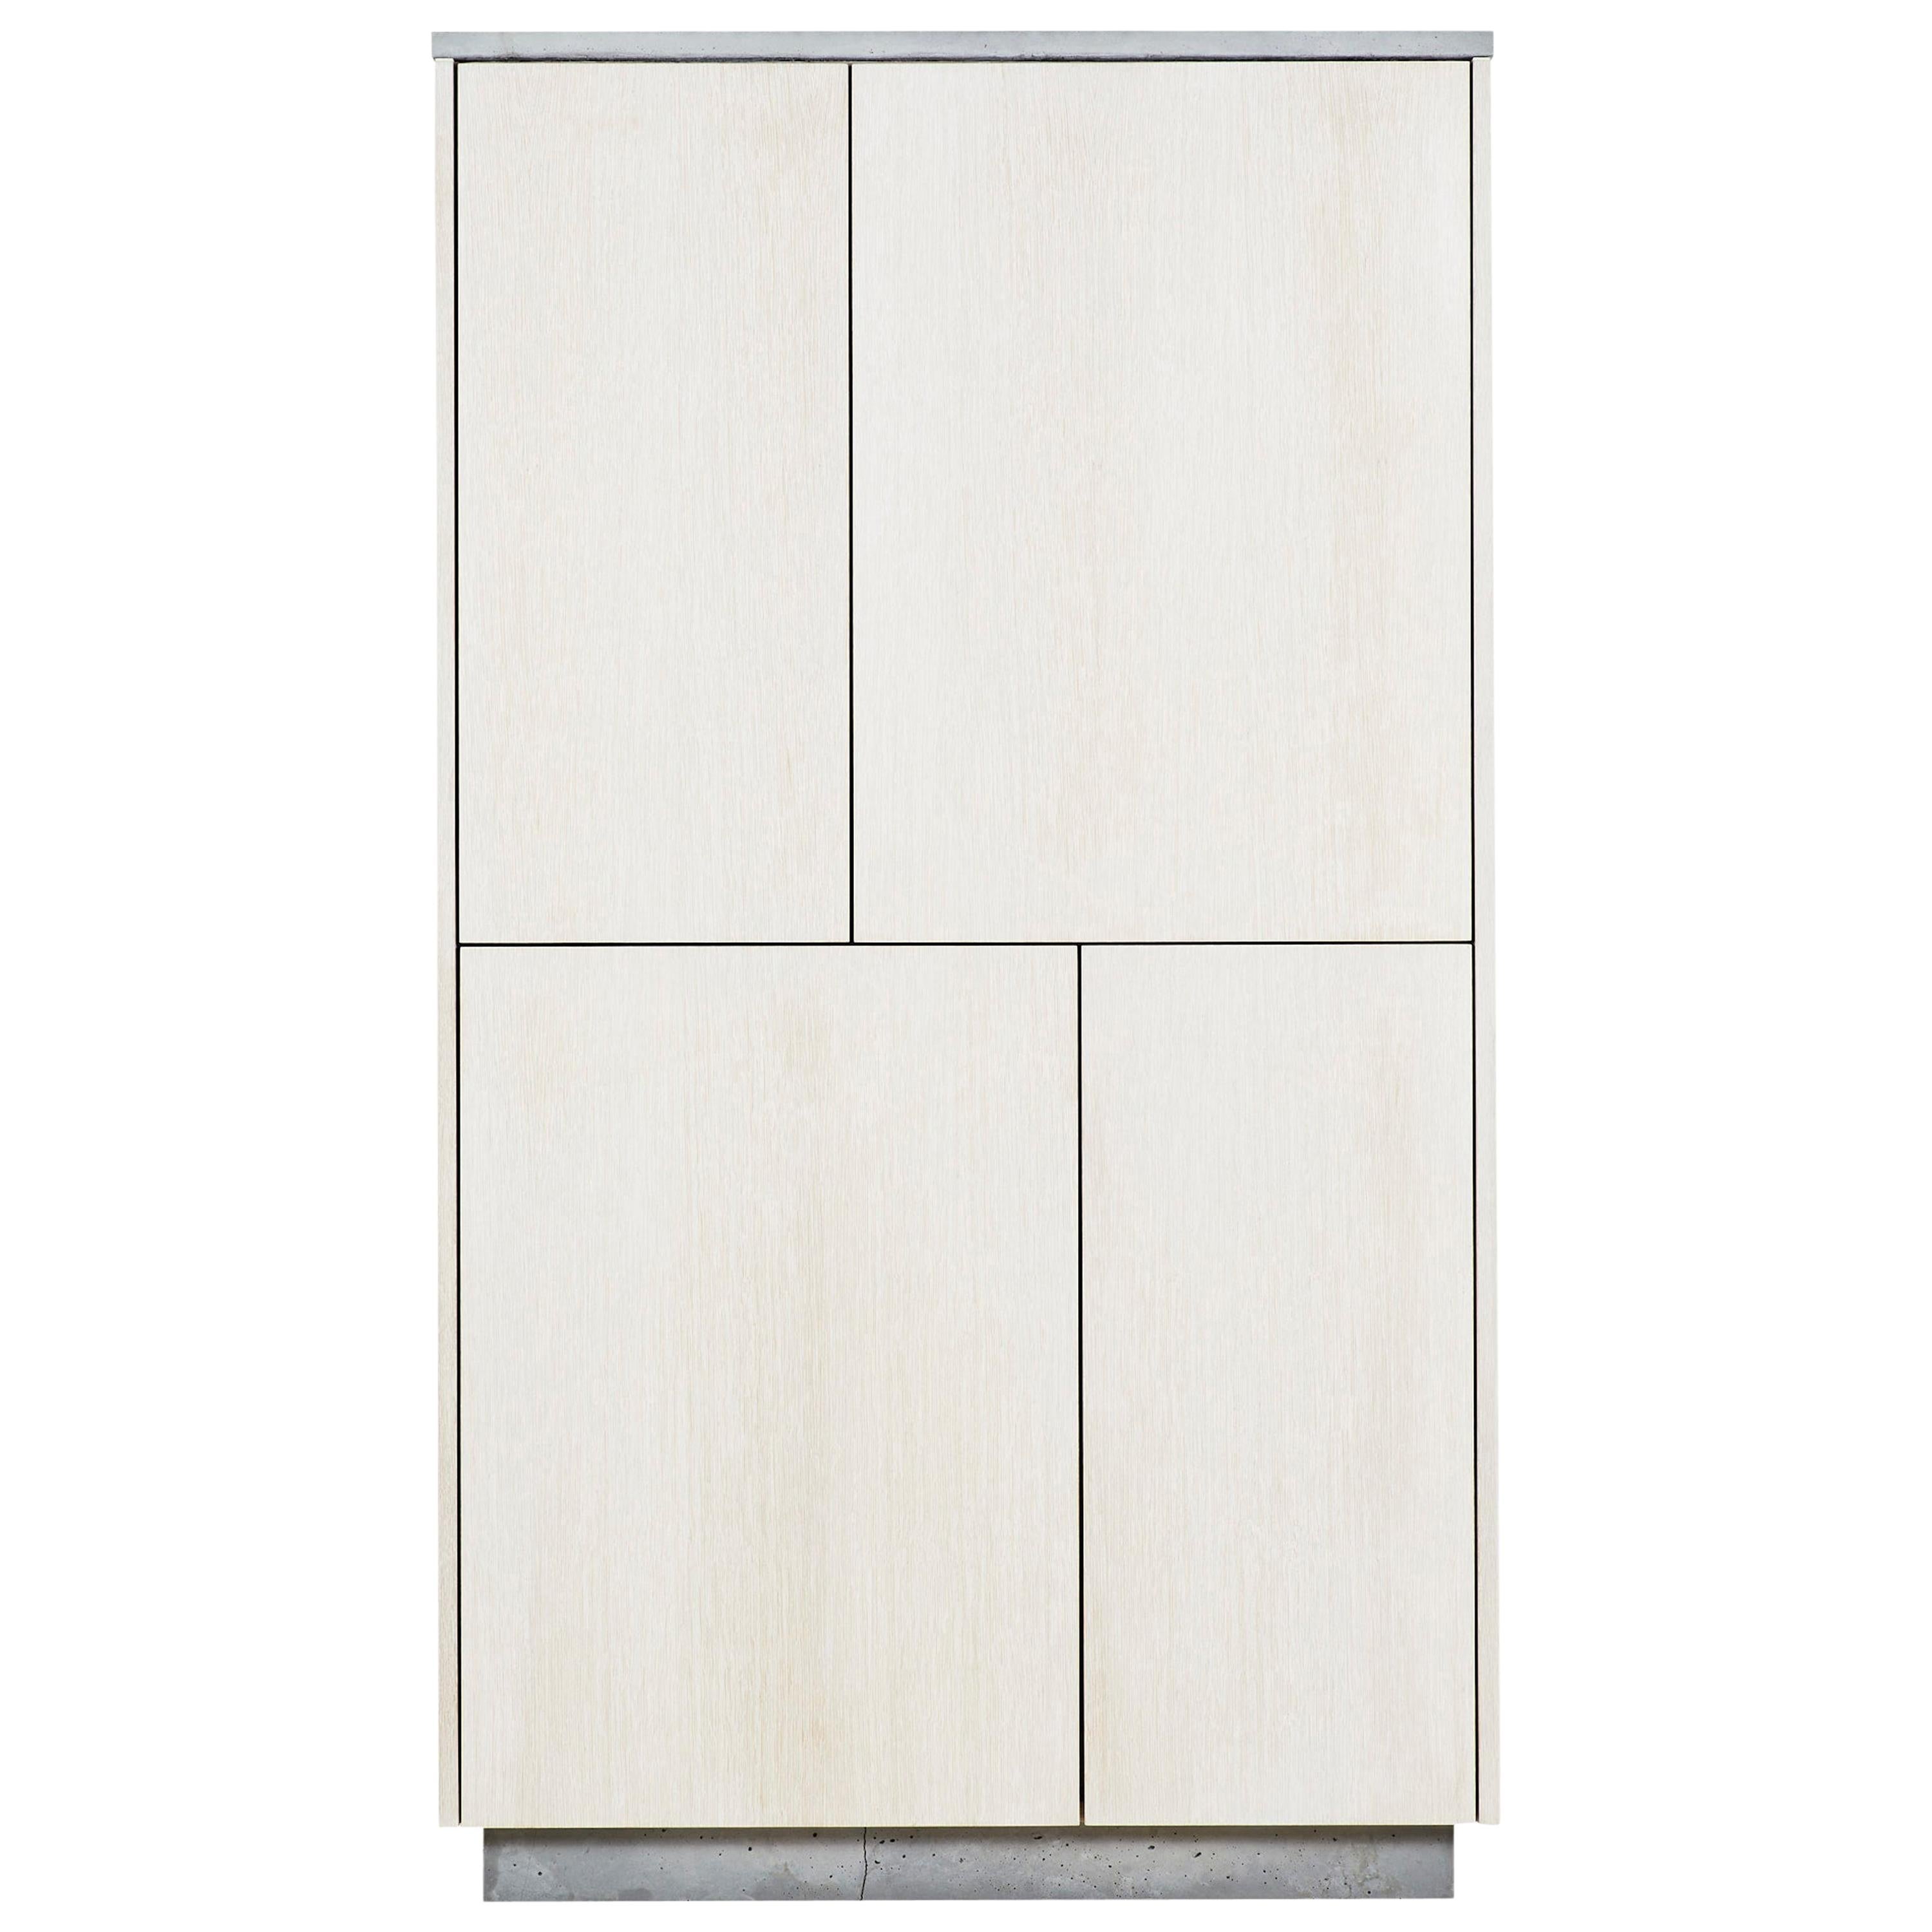 Minimal 4-Door "Janice Armoire" Concrete, White Oak and Mint Green Interior For Sale